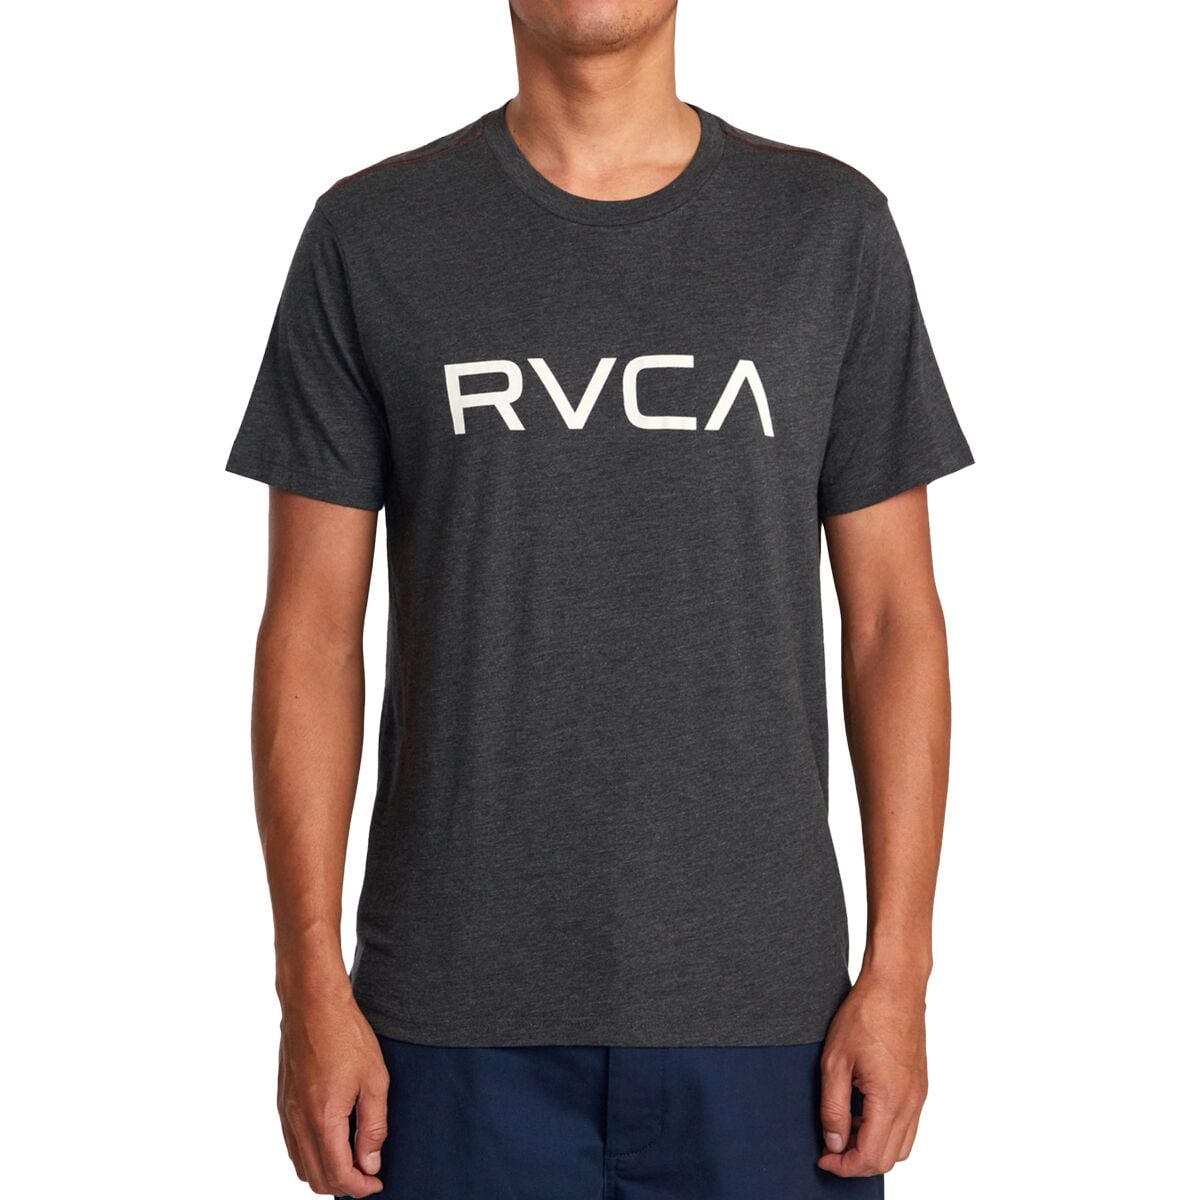 RVCA Men's T-Shirts and short-sleeves, stylish comfort clothing